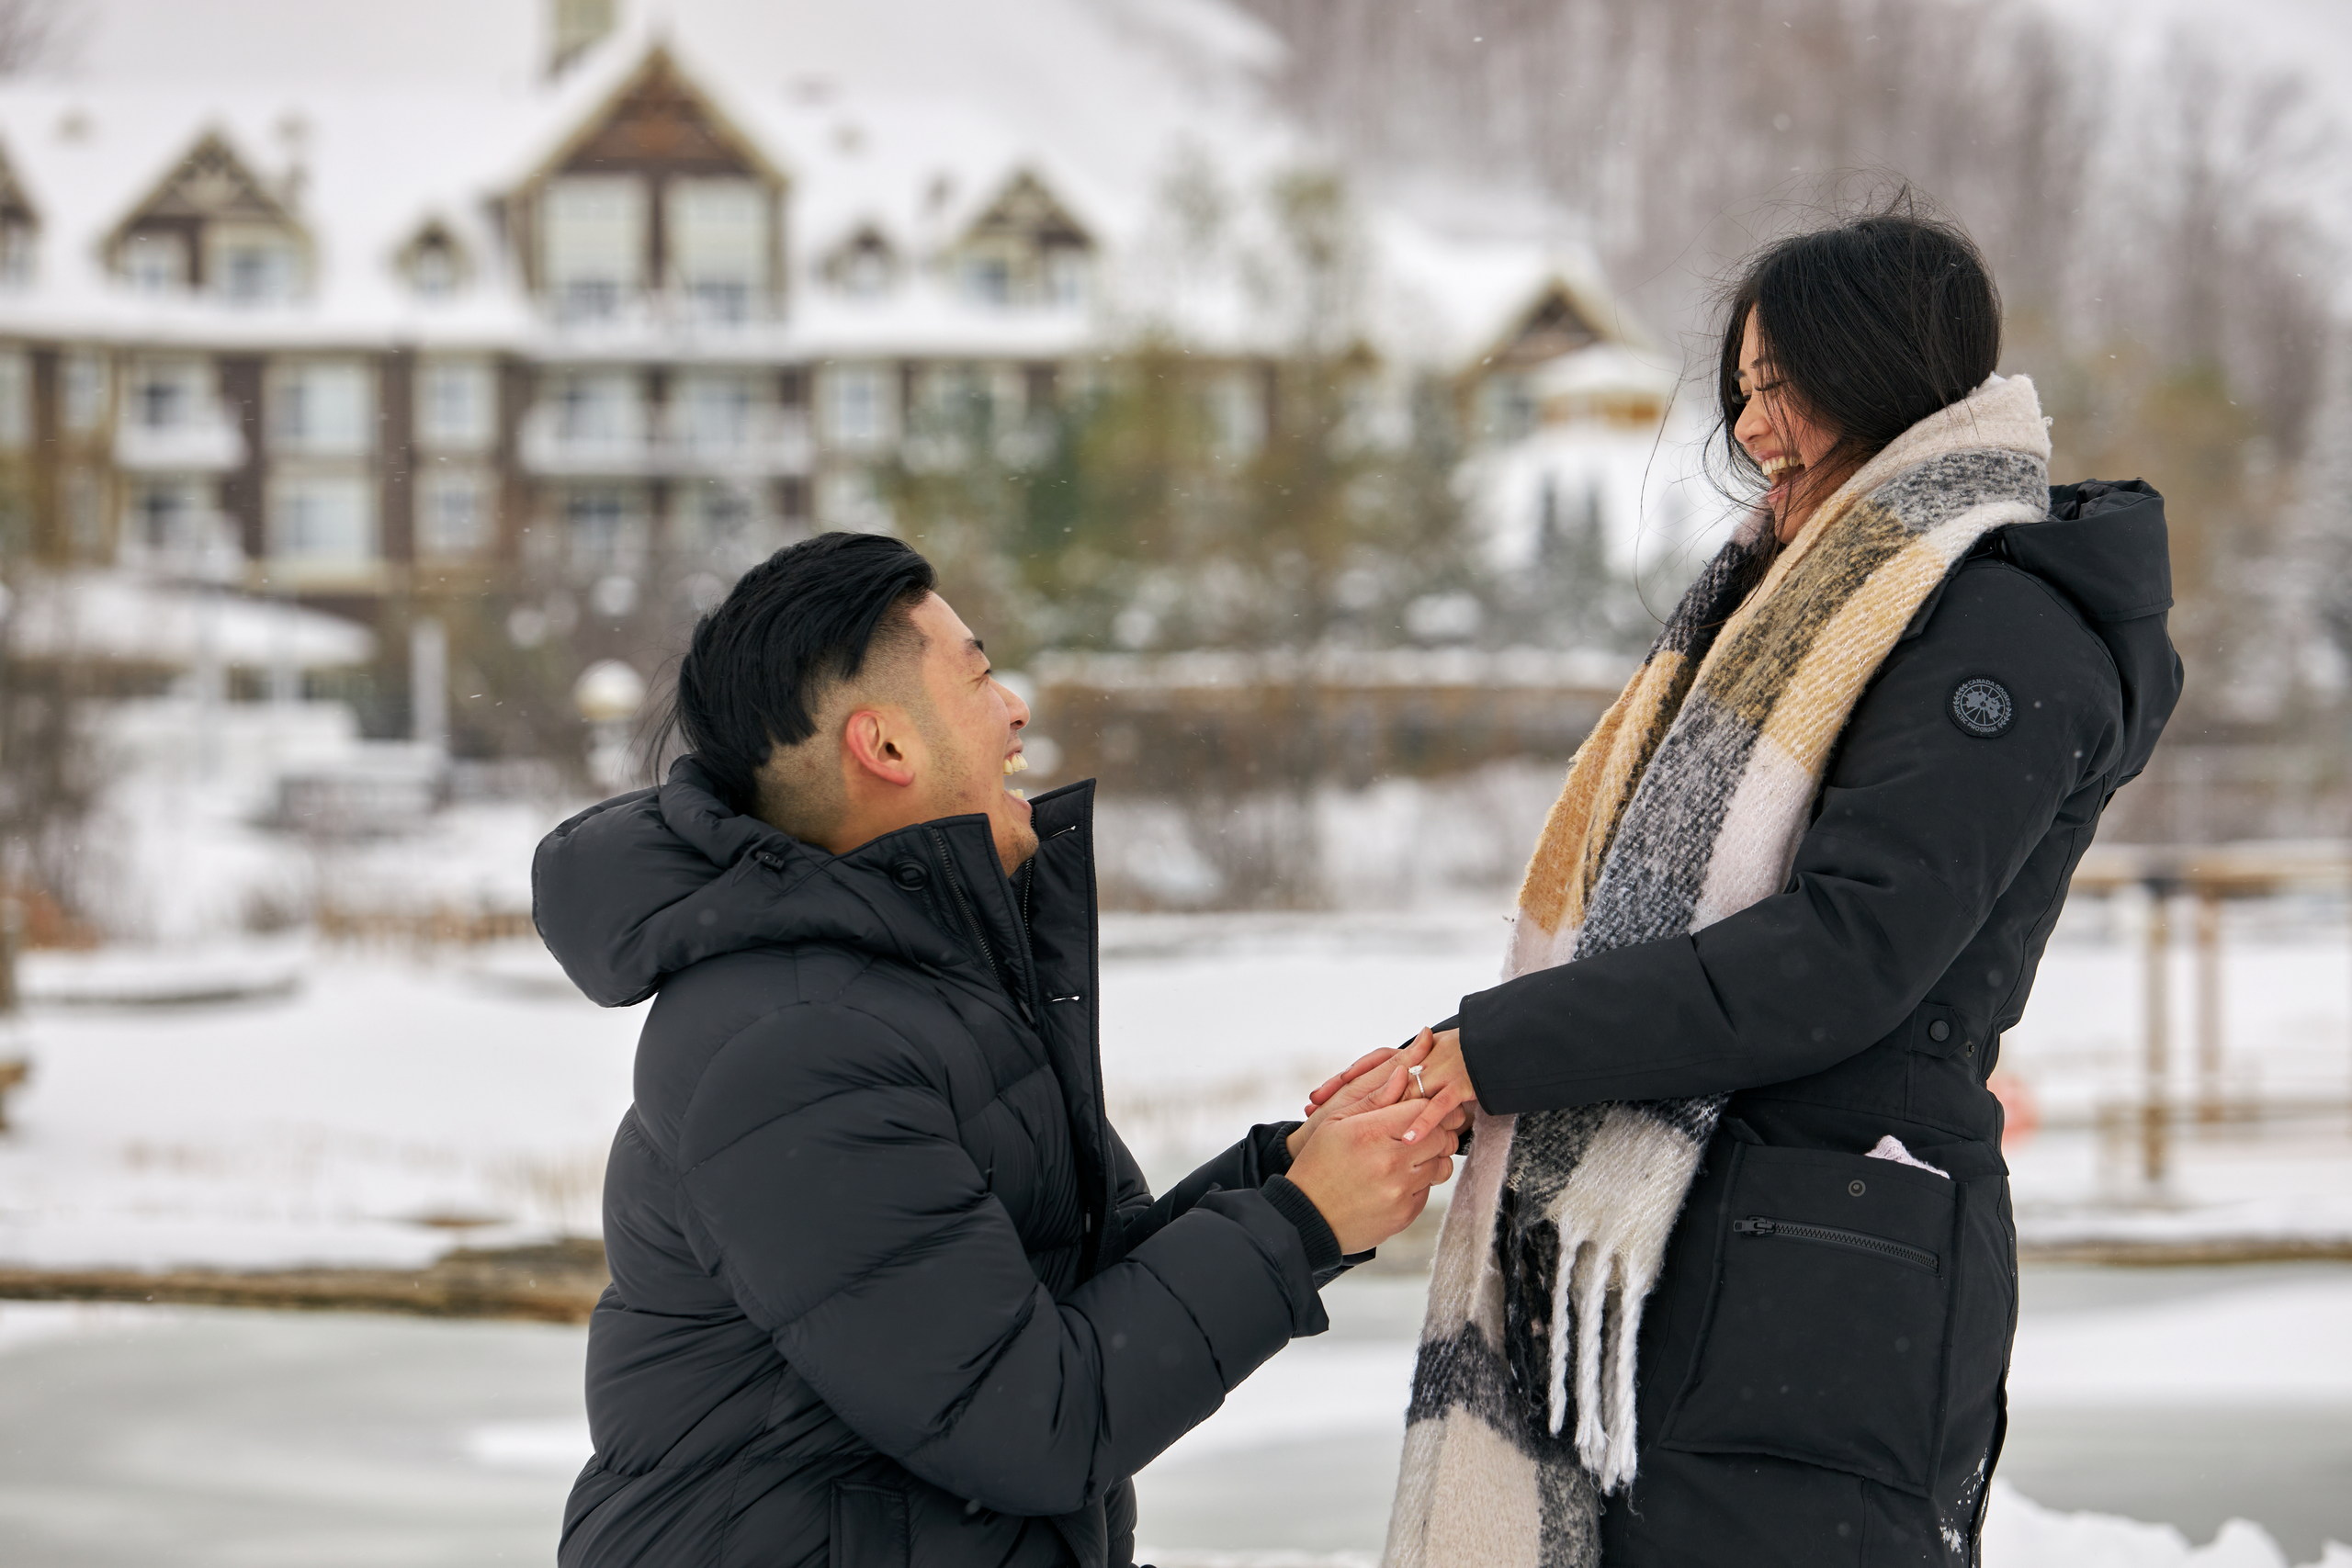 A young man on bent knee asks his girlfriend to marry him in front of Millpond at Blue Mountain Village in winter